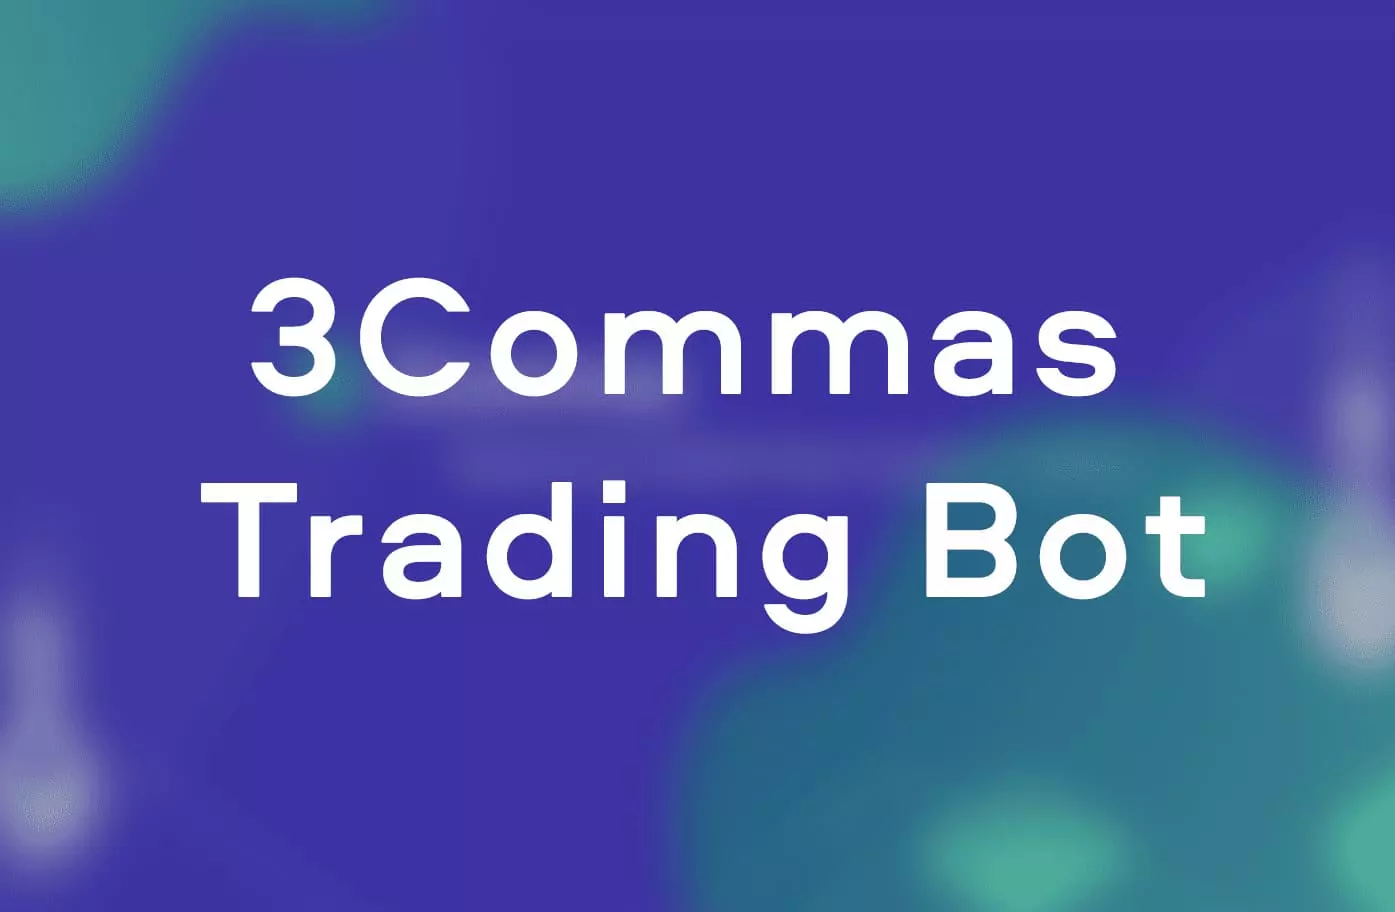 3commas trading bot review by safetrading